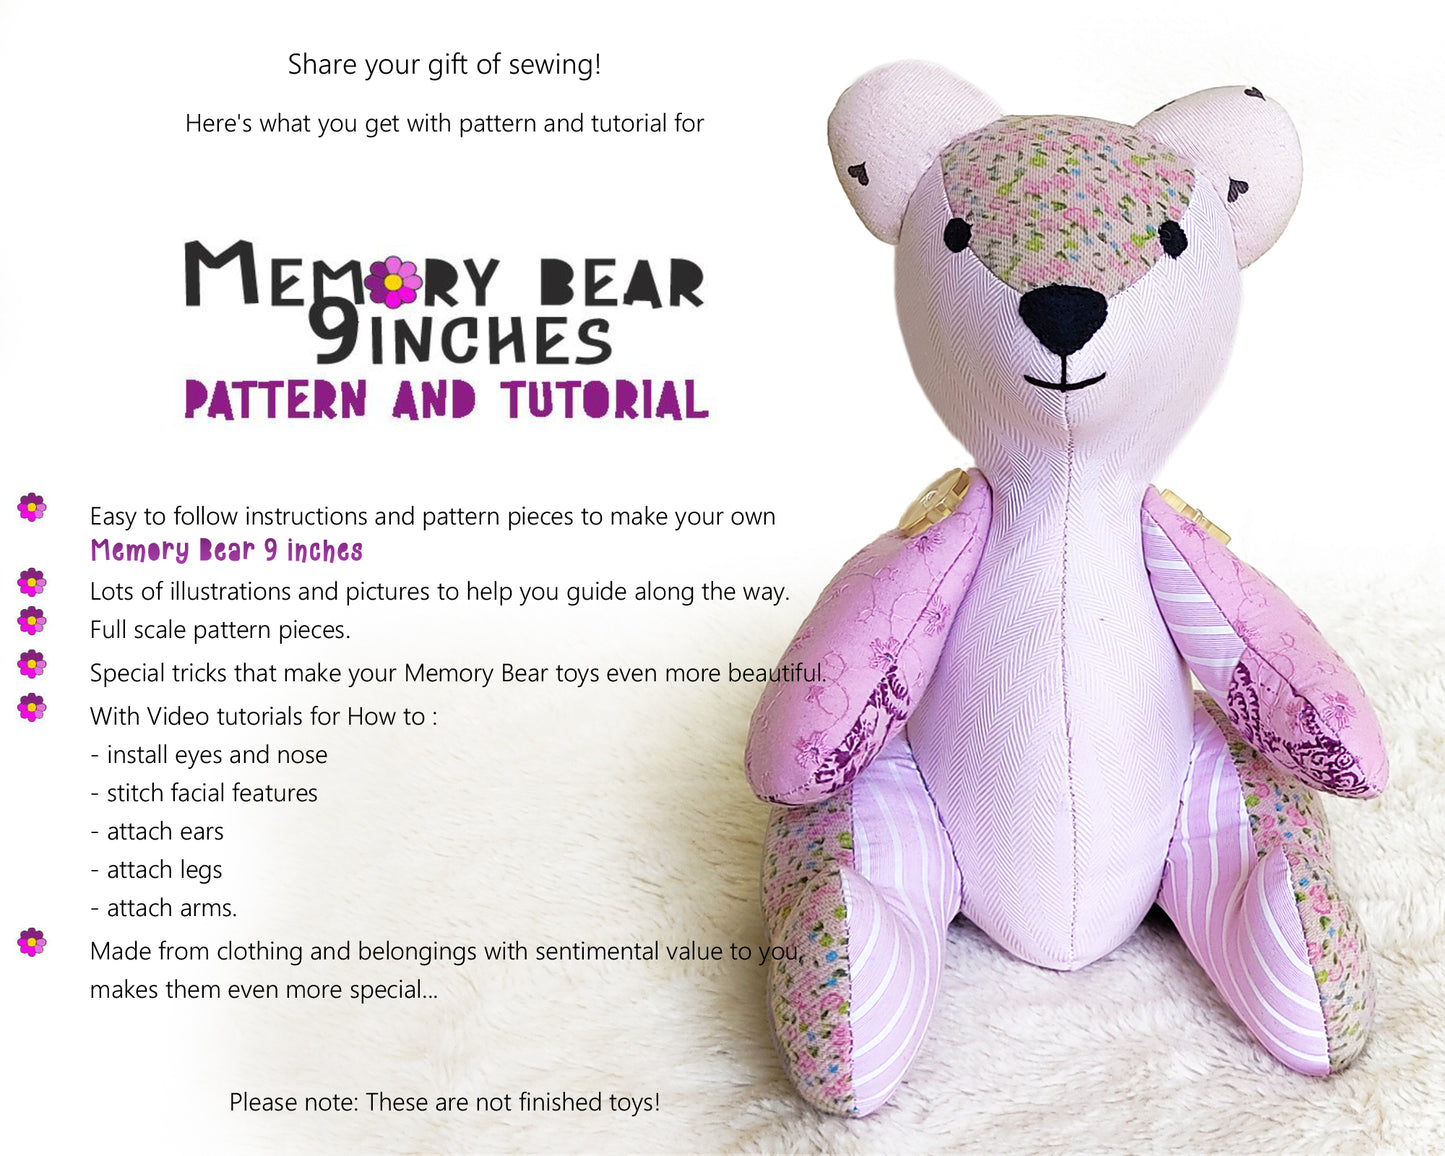 Memory Bear 9 inches - PDF sewing pattern and tutorial 08